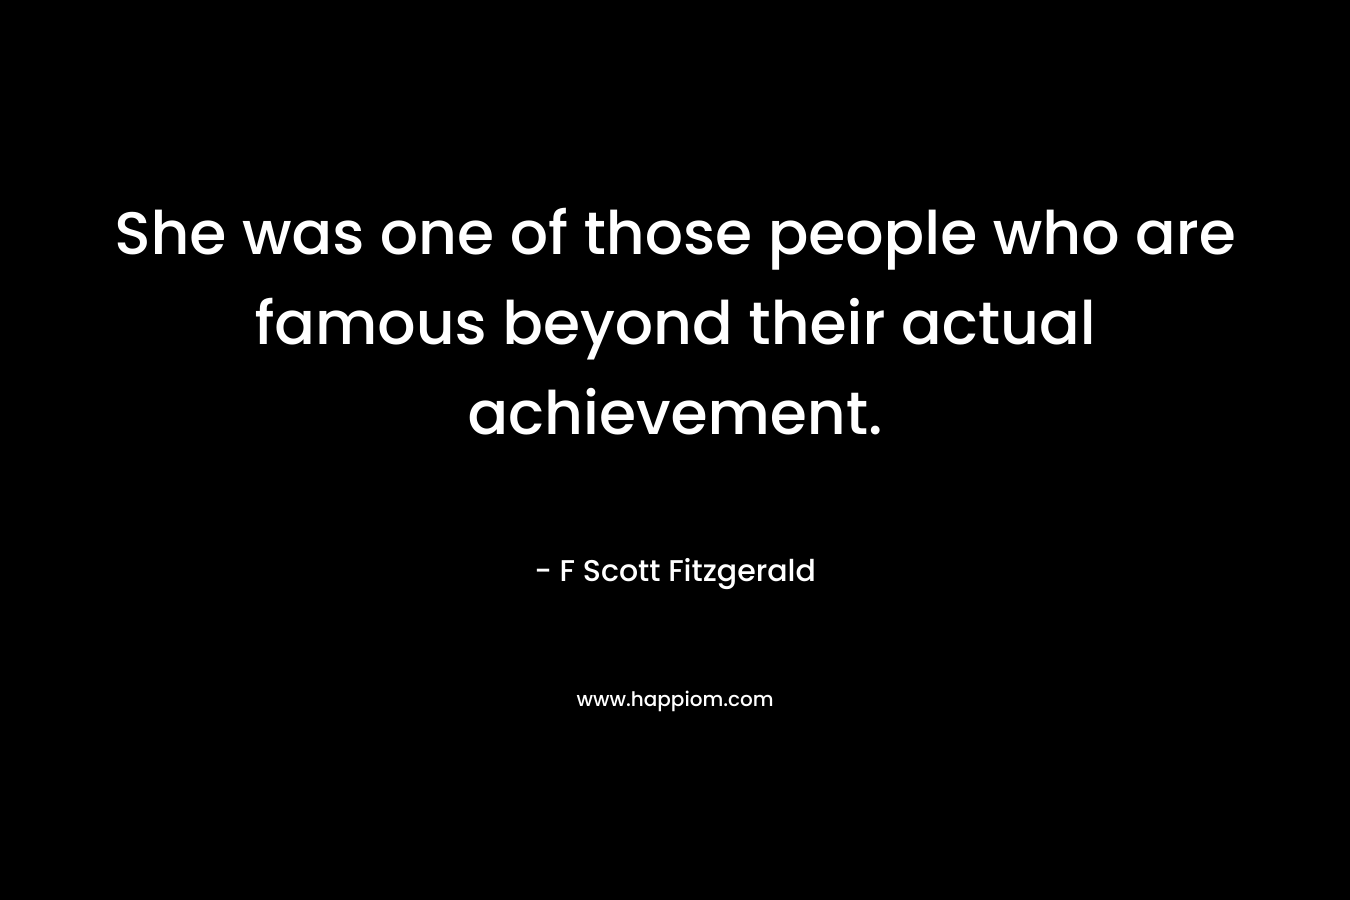 She was one of those people who are famous beyond their actual achievement. – F Scott Fitzgerald